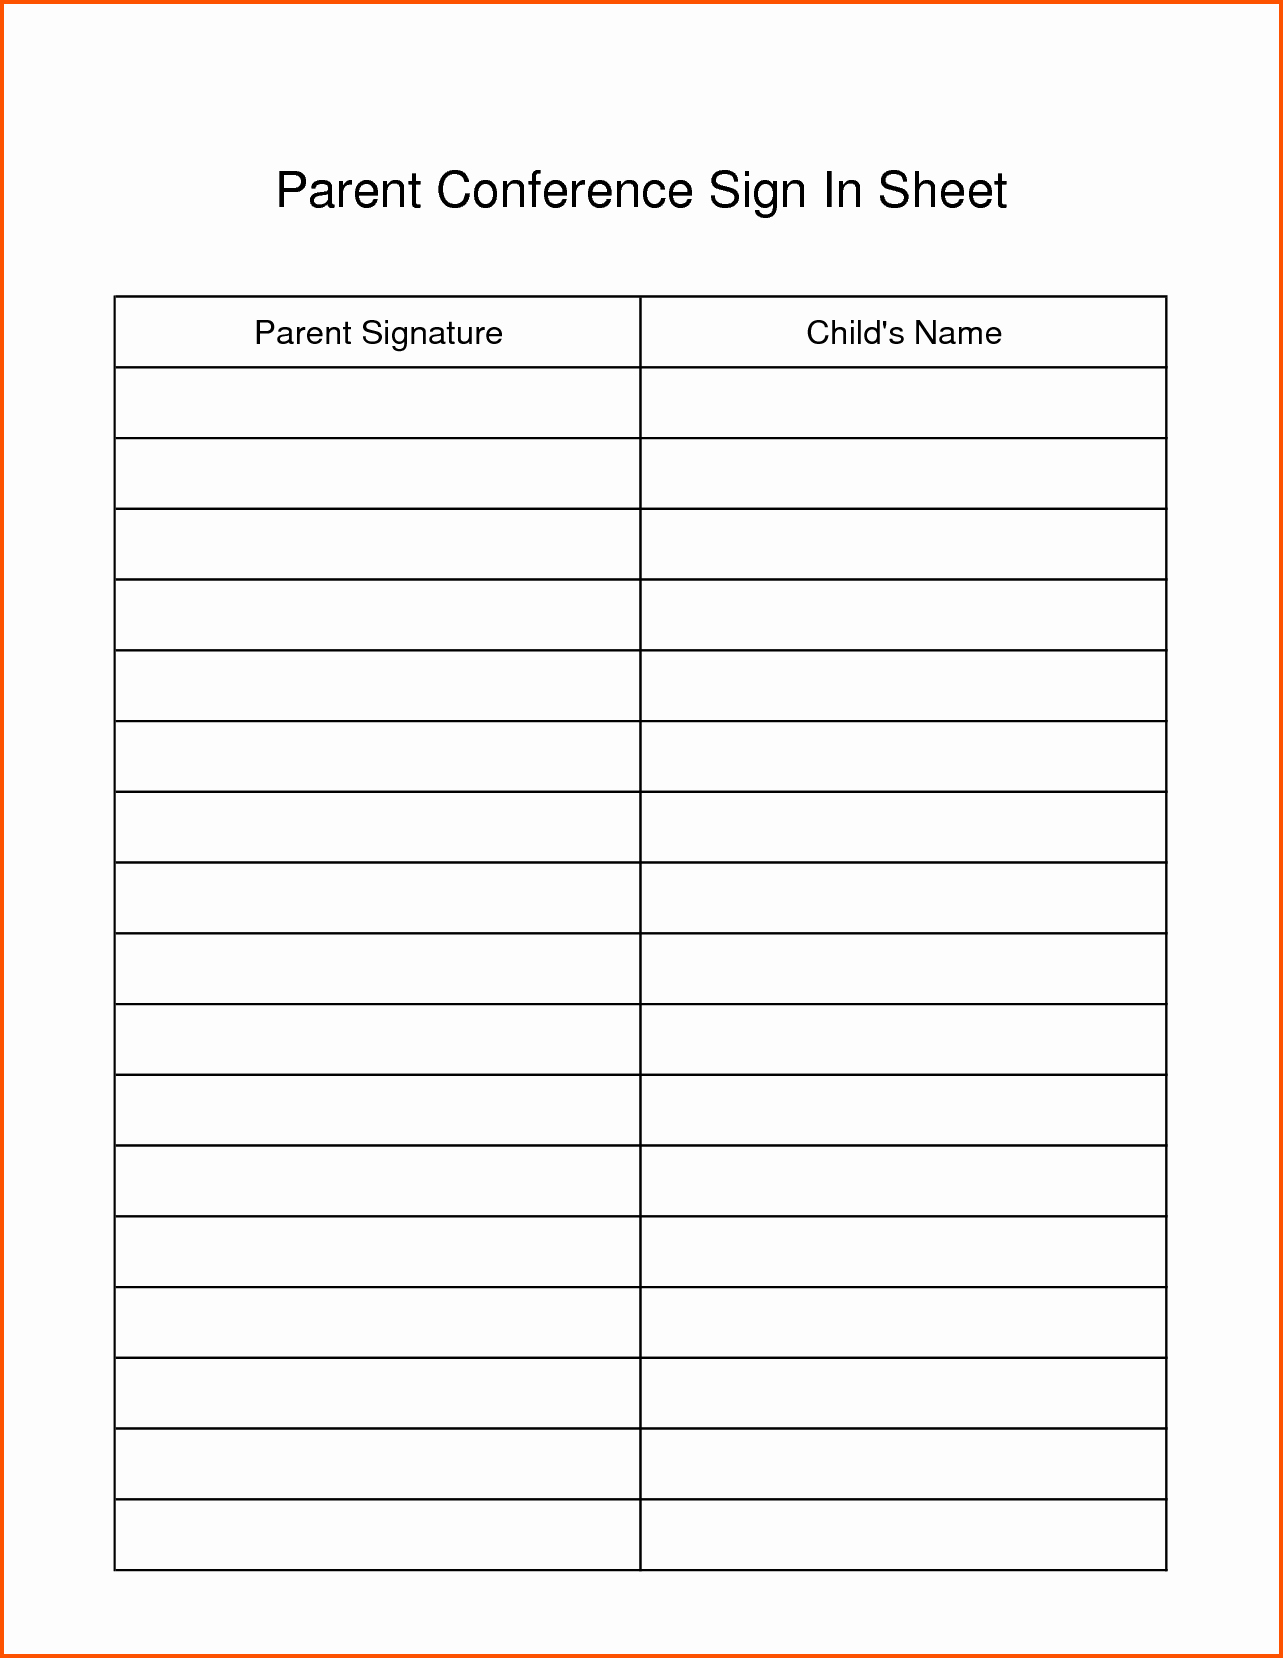 Excel Template Sign In Sheet Unique Excel Sign In Sheet Template Portablegasgrillweber